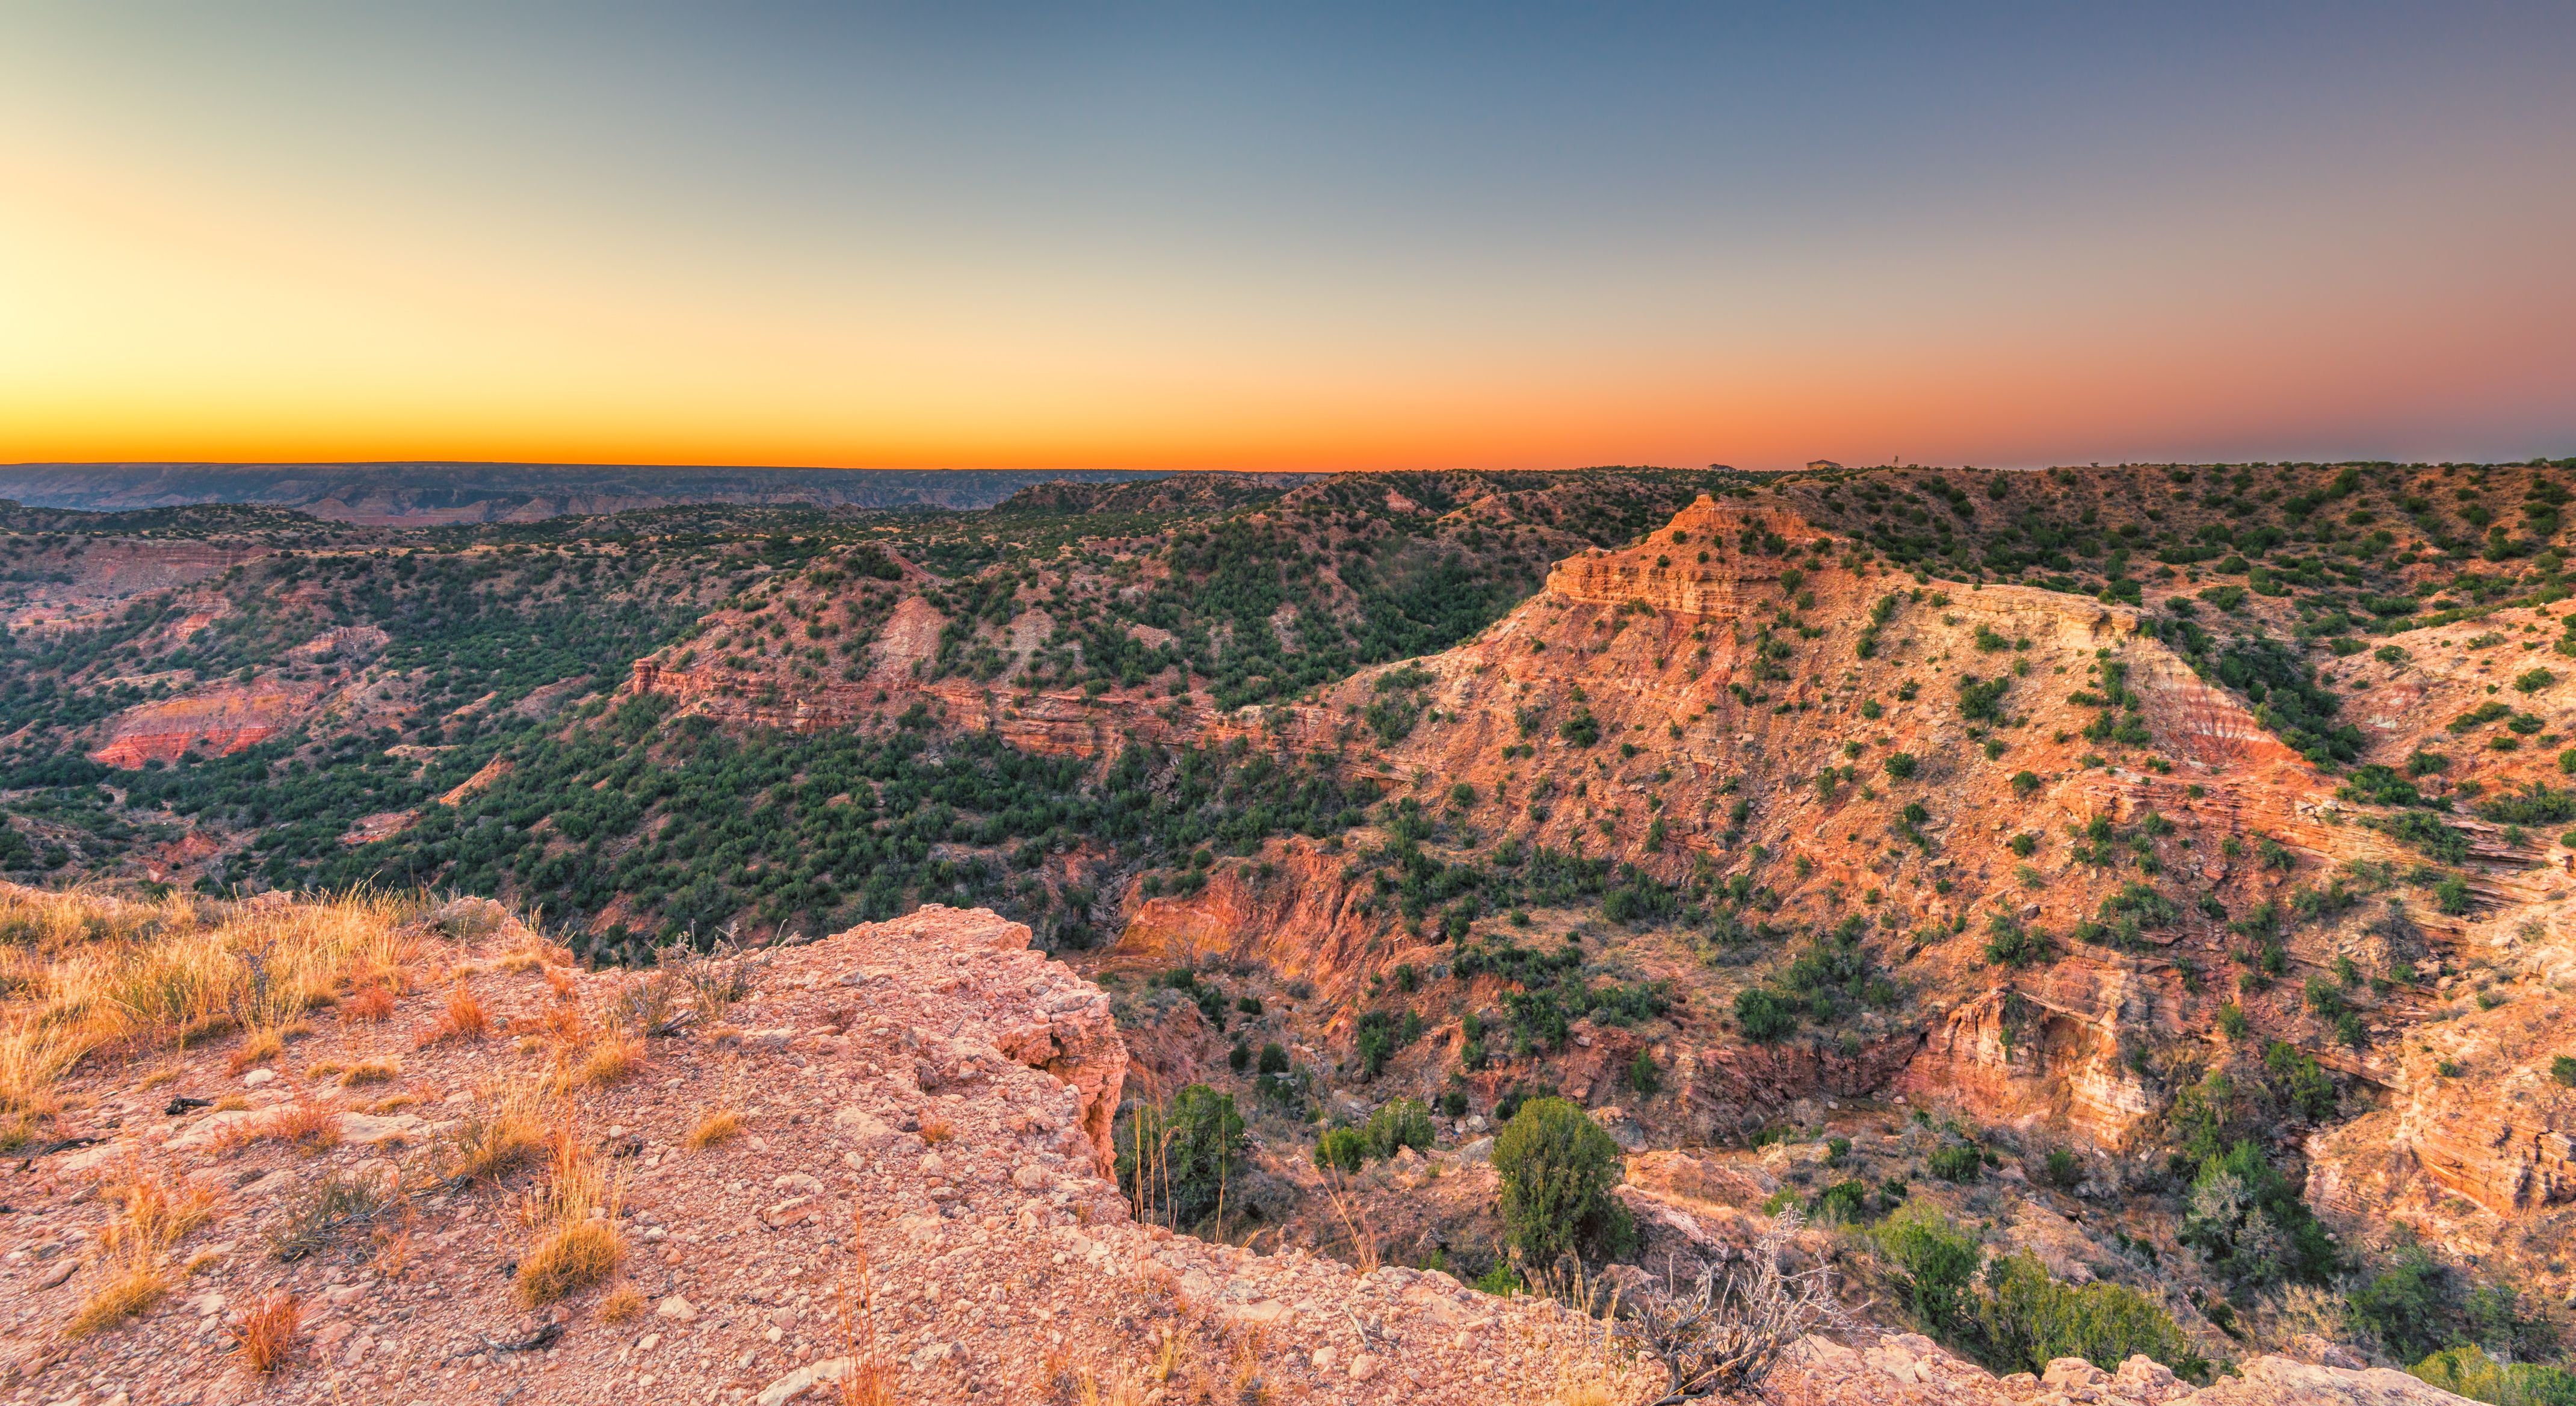 palo duro state park at sunset